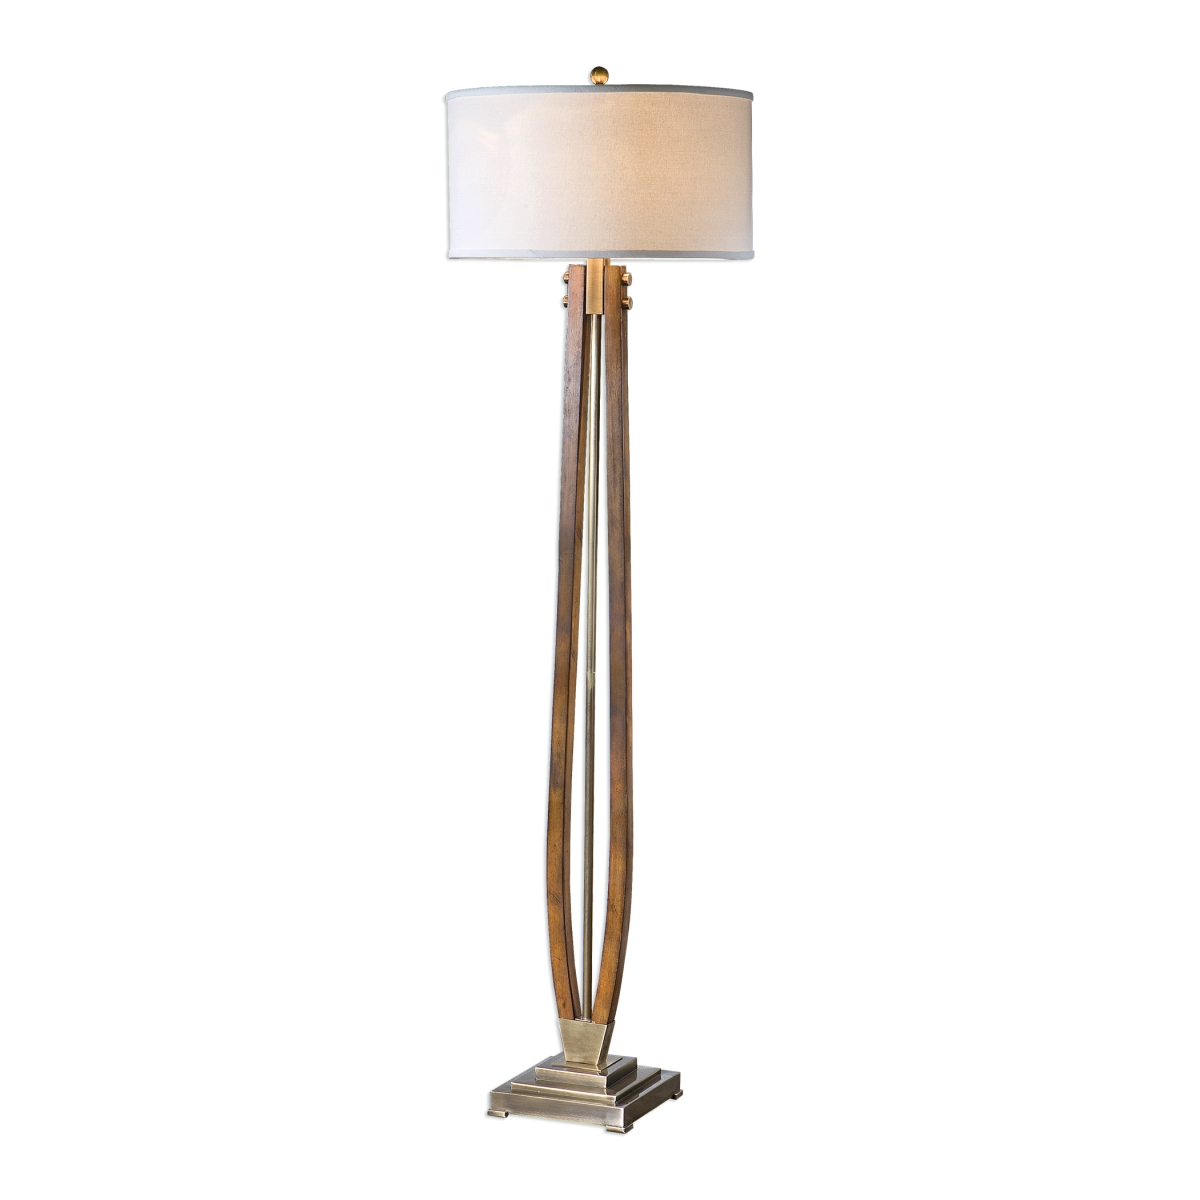 Picture of 212 Main 28105 Boydton Burnished Wood Floor Lamp